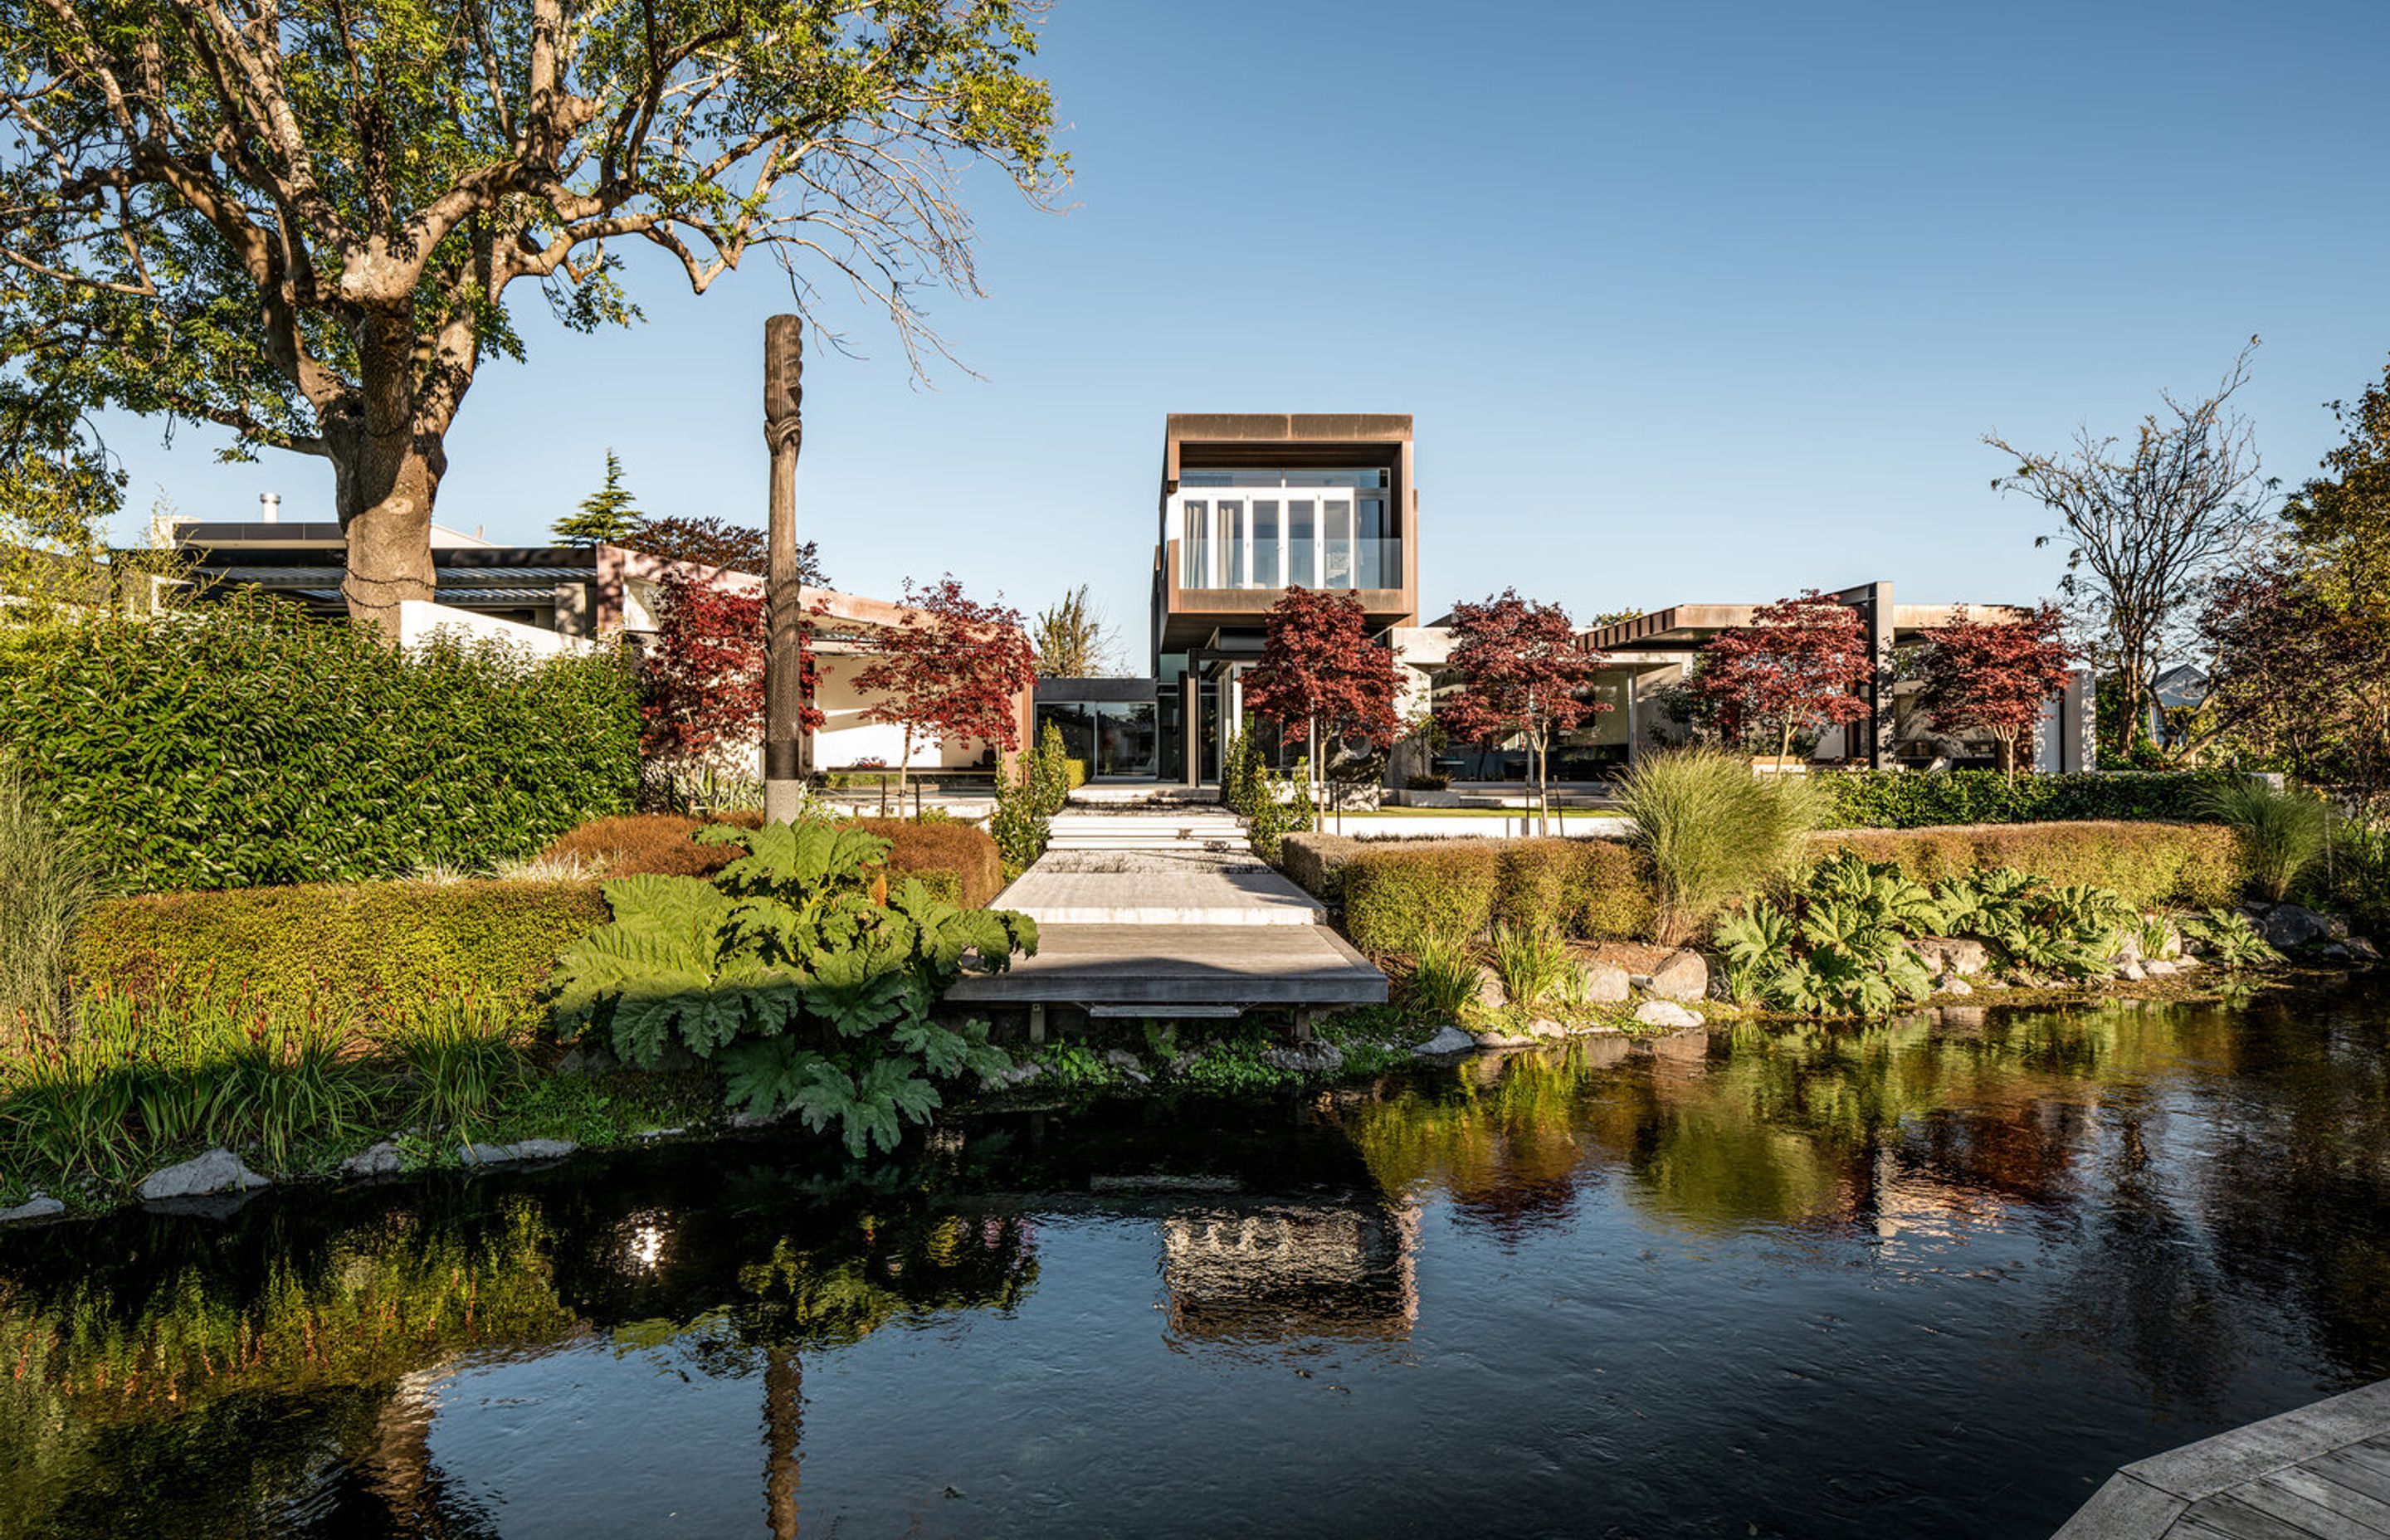 Situated on the banks of the Wairarapa Stream in Christchurch, this house uses architecture and landscaping to maximise the connection between the built environment and the natural environment.